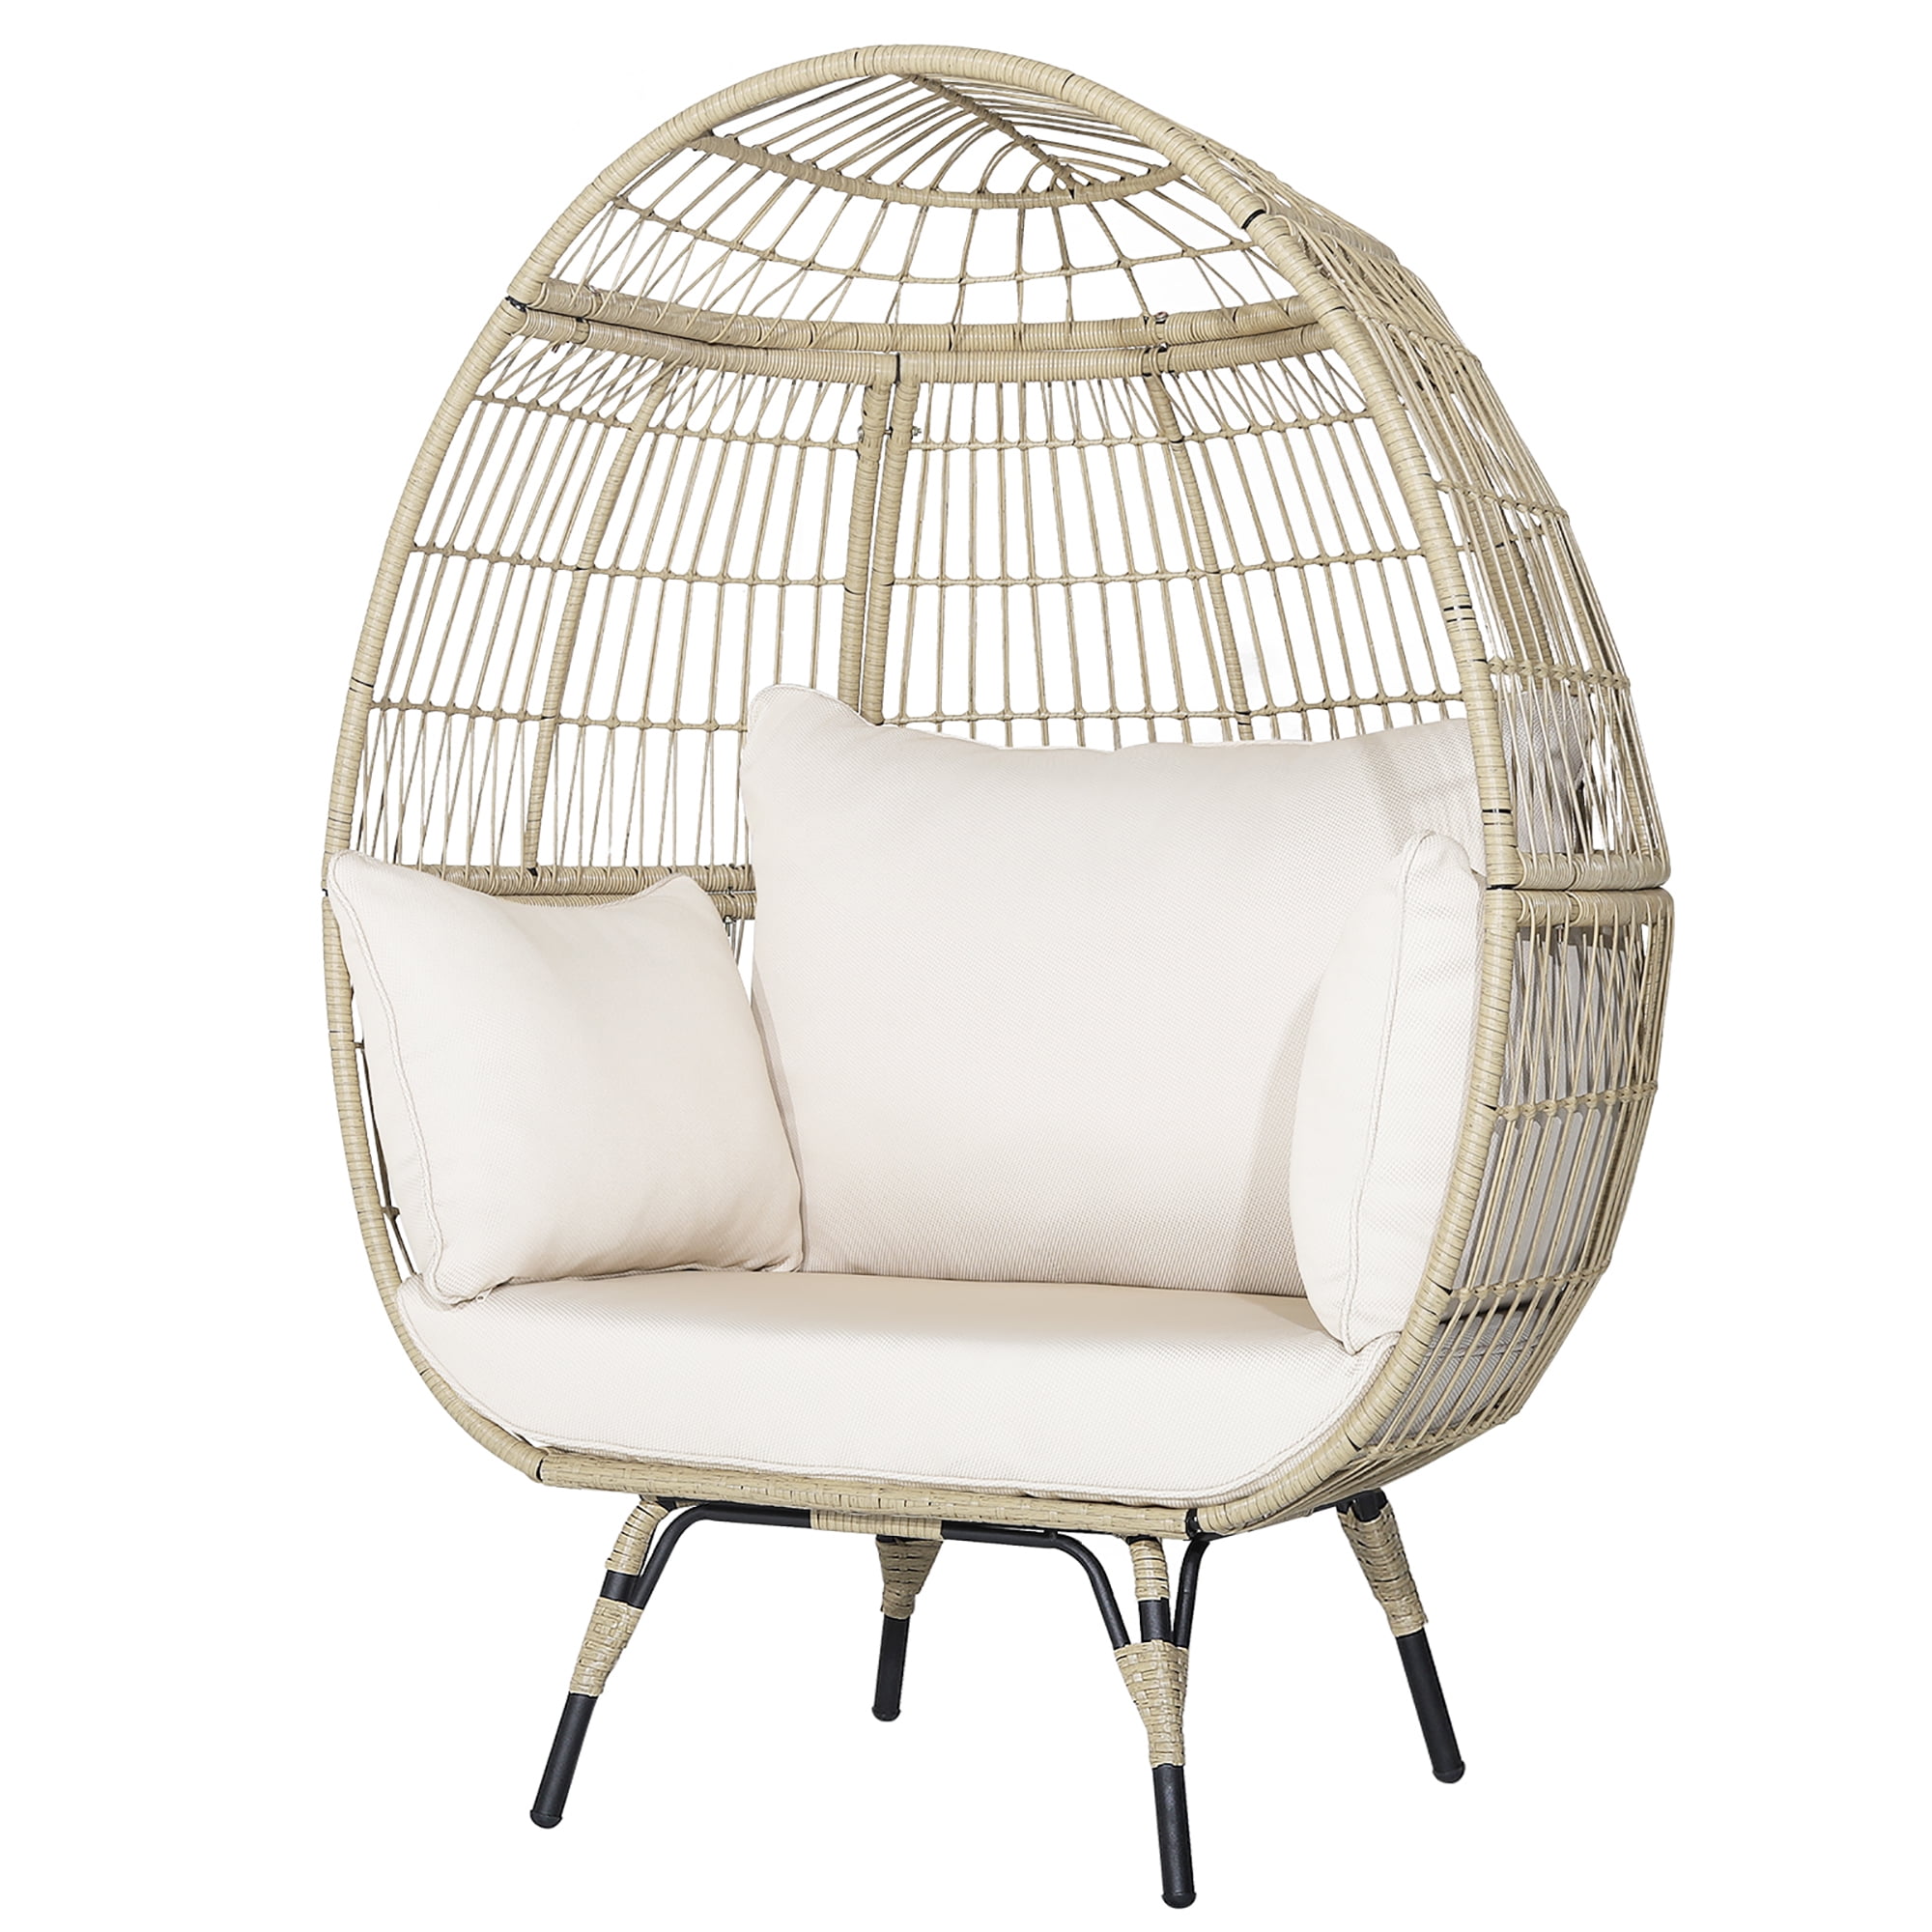 Costway Patio Oversized Rattan Egg Chair Lounge Basket with 4 Cushions ...